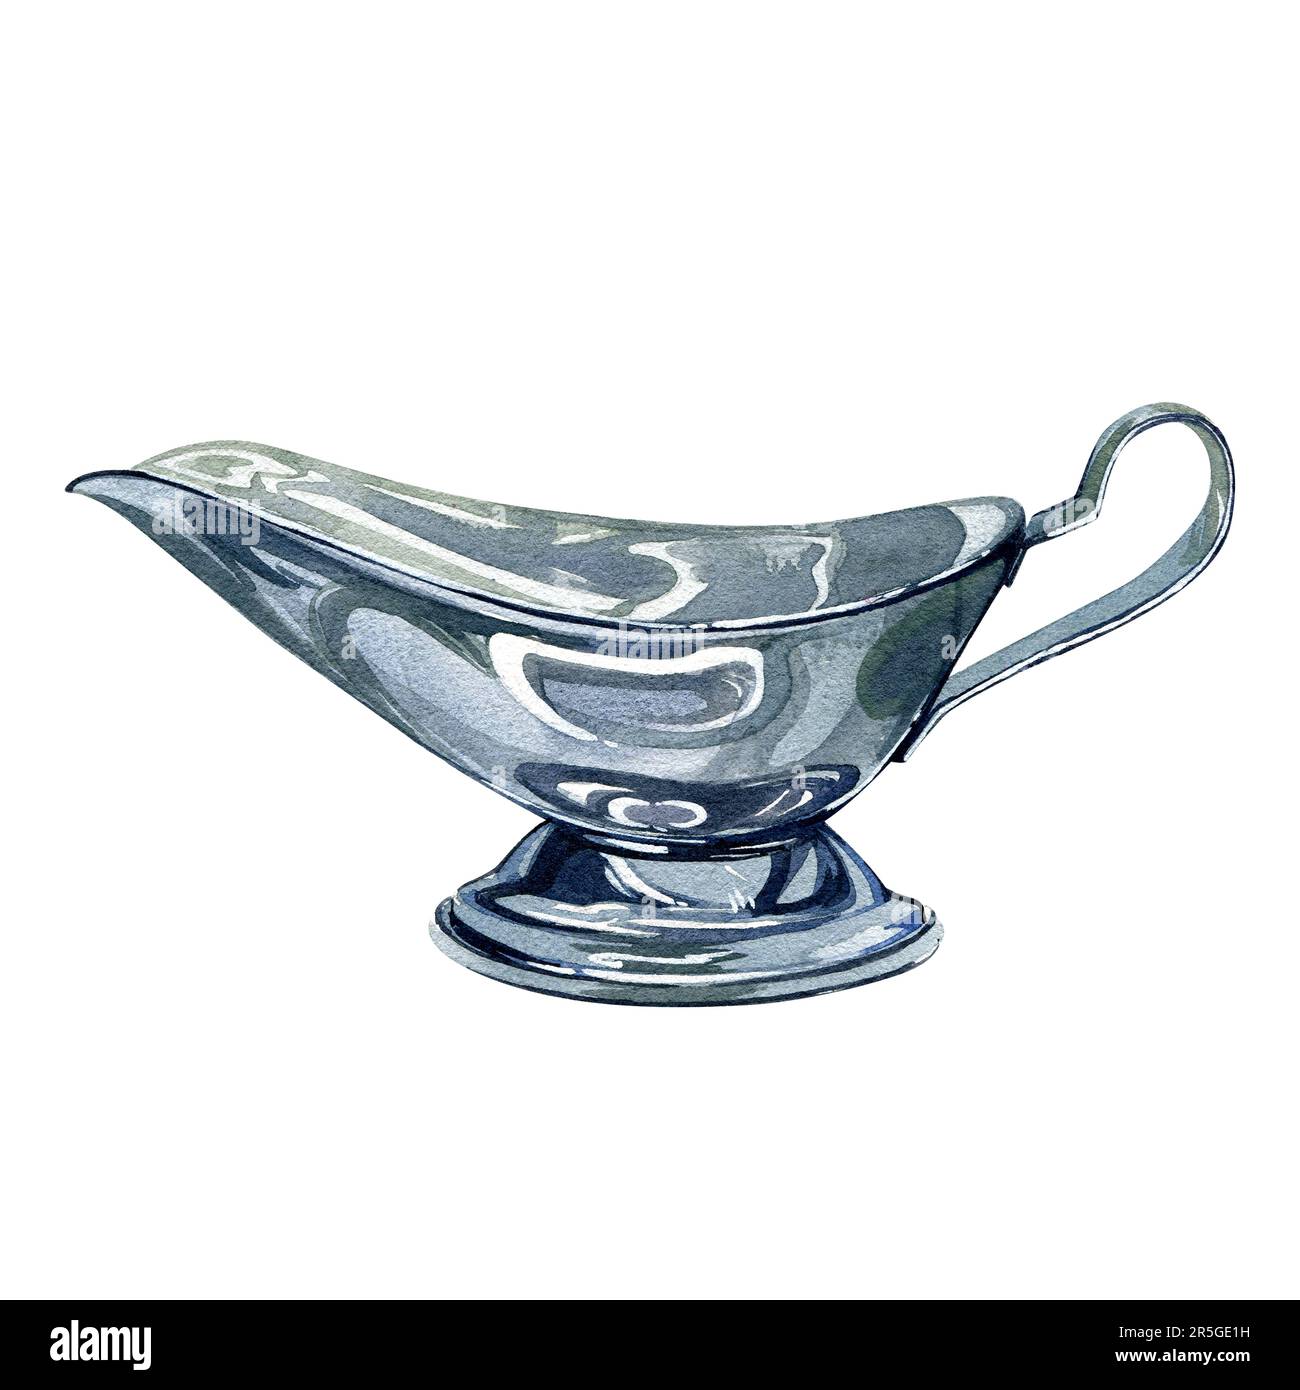 https://c8.alamy.com/comp/2R5GE1H/metal-silver-gravy-boat-isolated-on-white-background-watercolor-hand-drawing-realistic-silver-cutlery-object-illustration-art-for-design-logo-poste-2R5GE1H.jpg